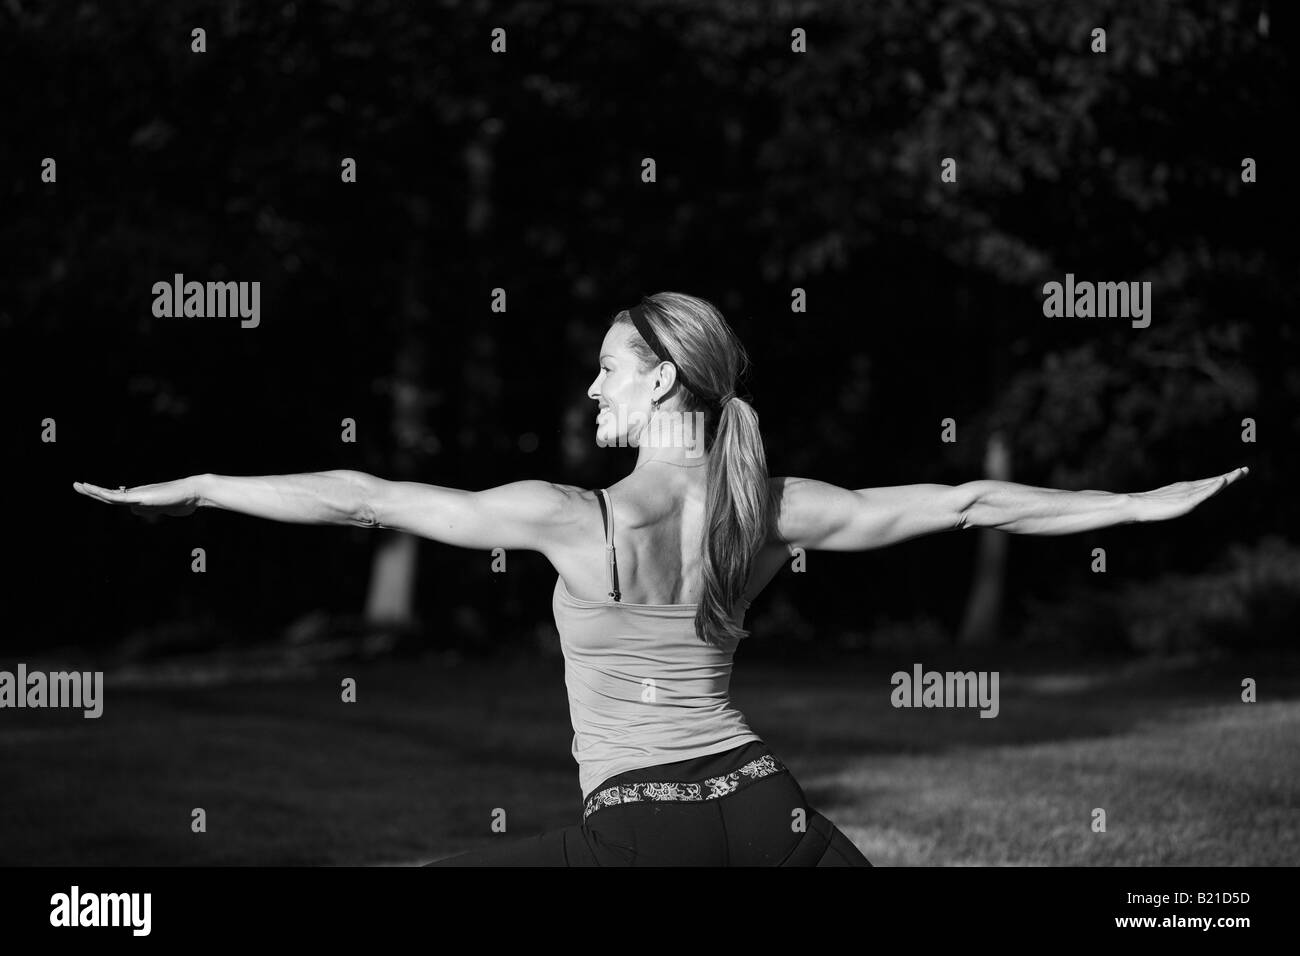 An athletic woman doing yoga Stock Photo